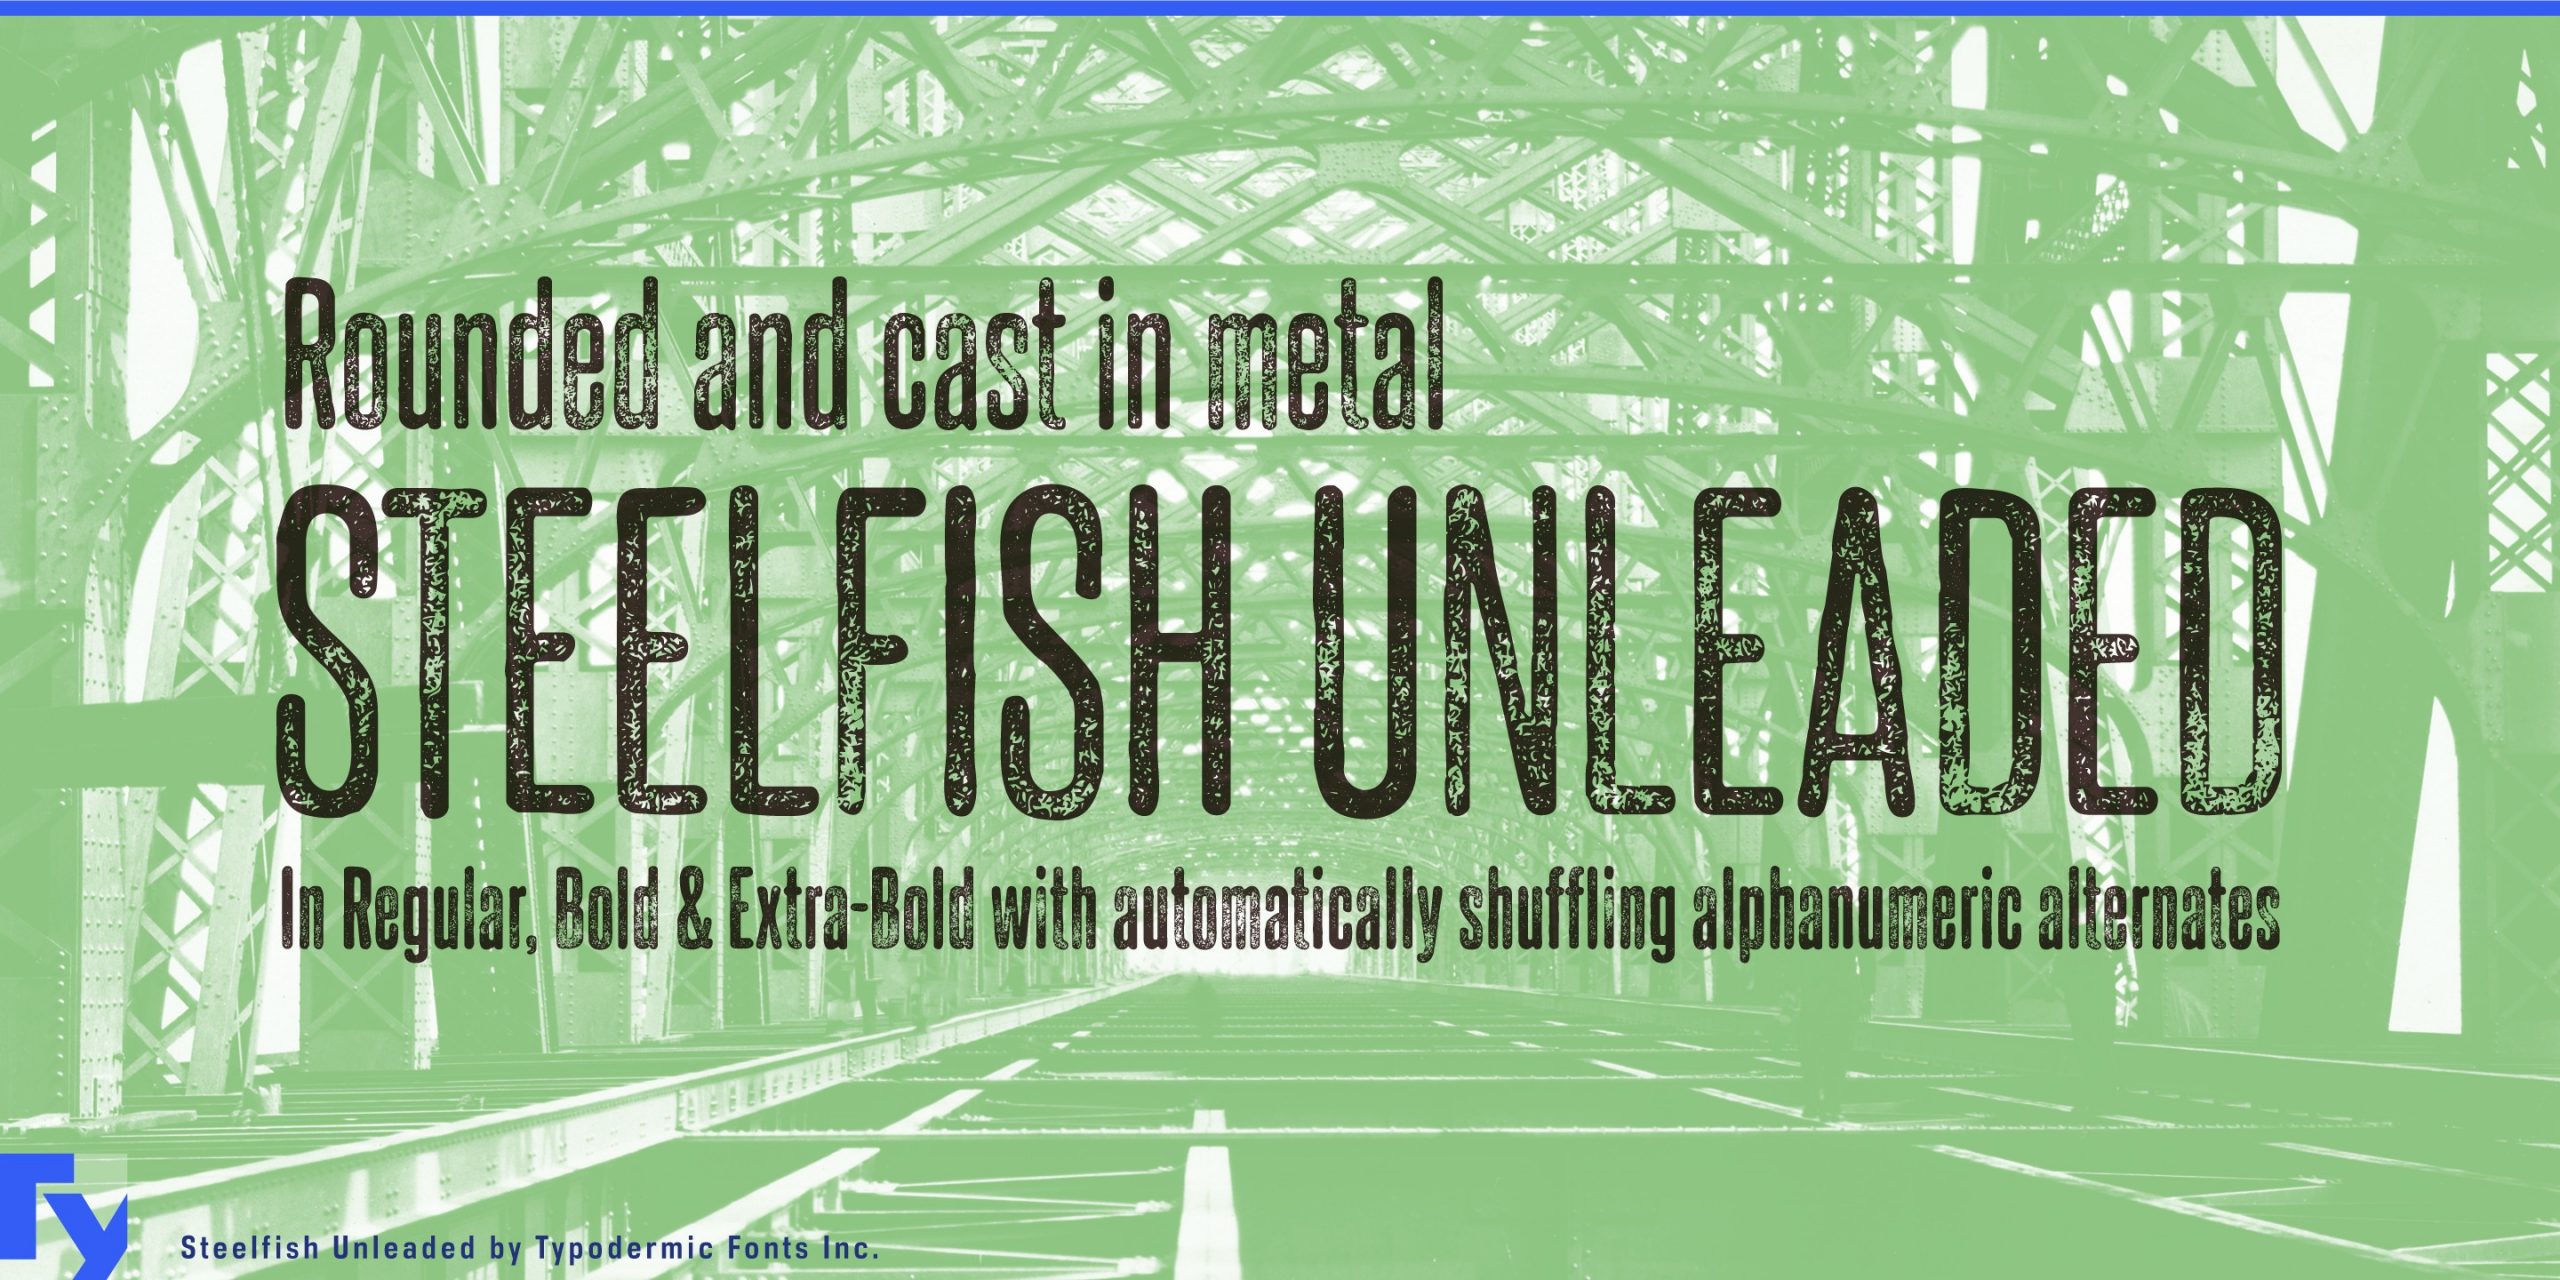 Discover the timeless design of Steelfish Unleaded typeface.